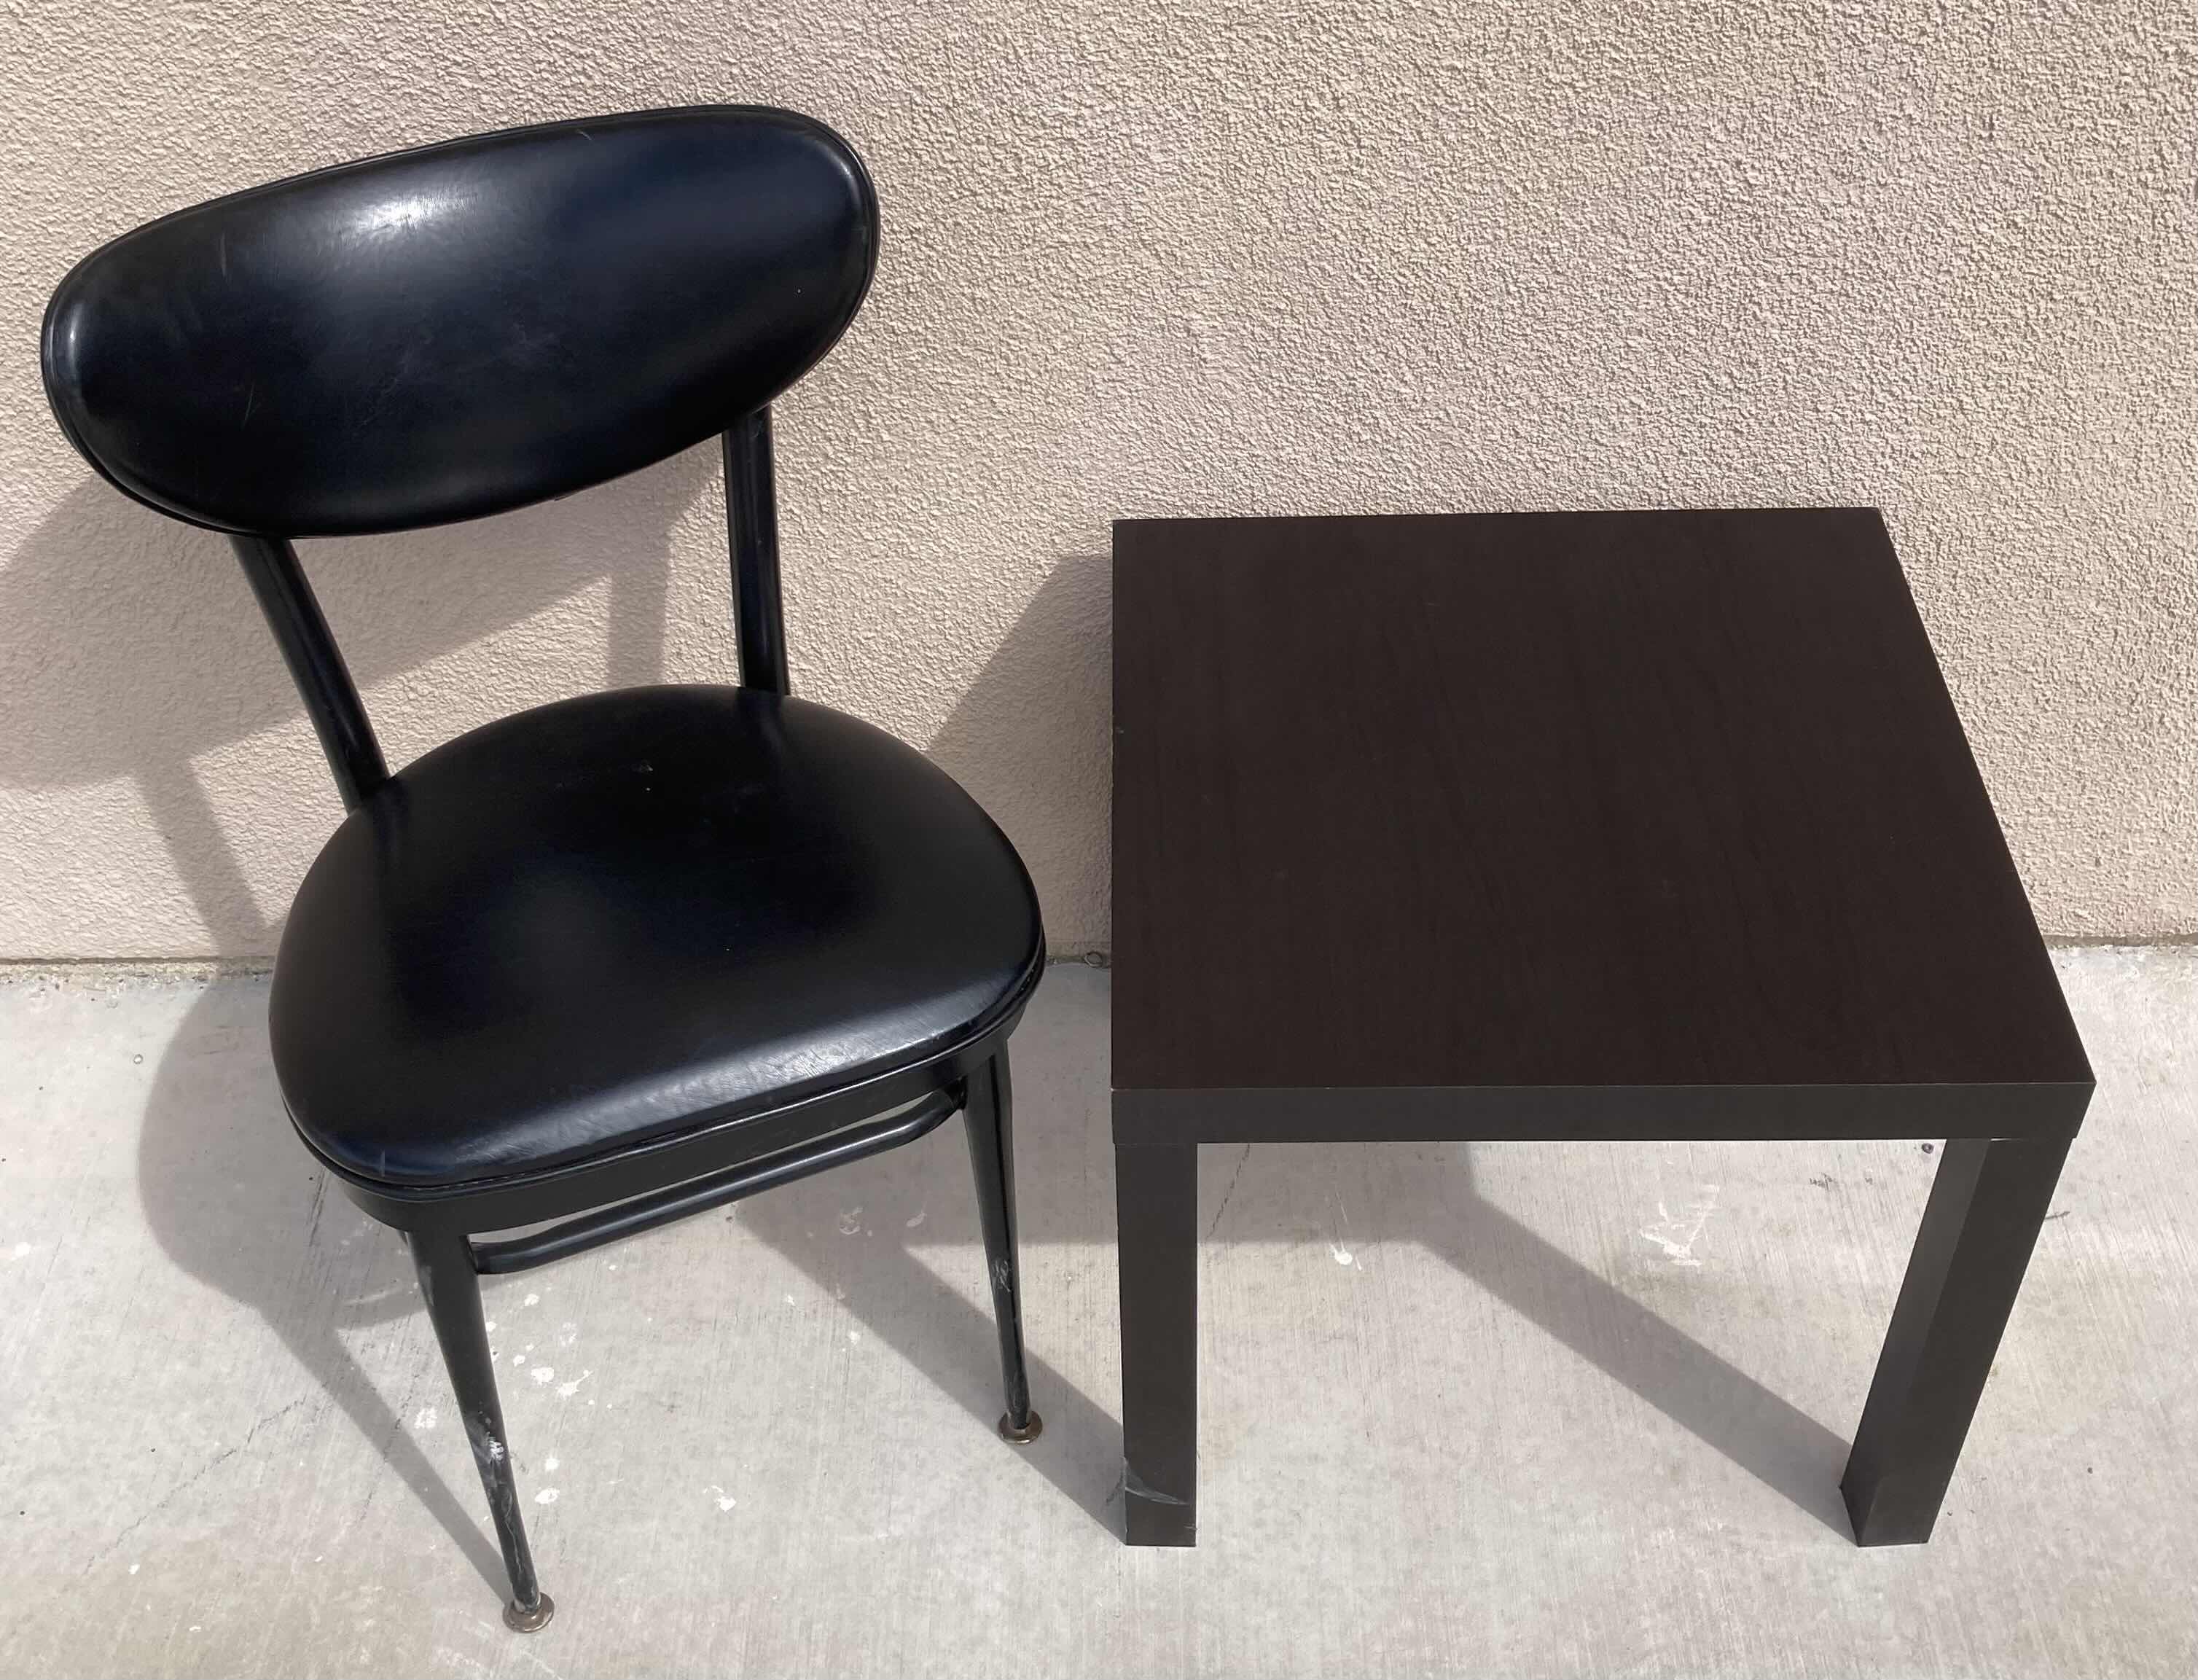 Photo 2 of LION BRAND BLACK METAL PADDED CHAIR & DARK WOOD FINISH SIDE TABLE 20” X 20” H18”